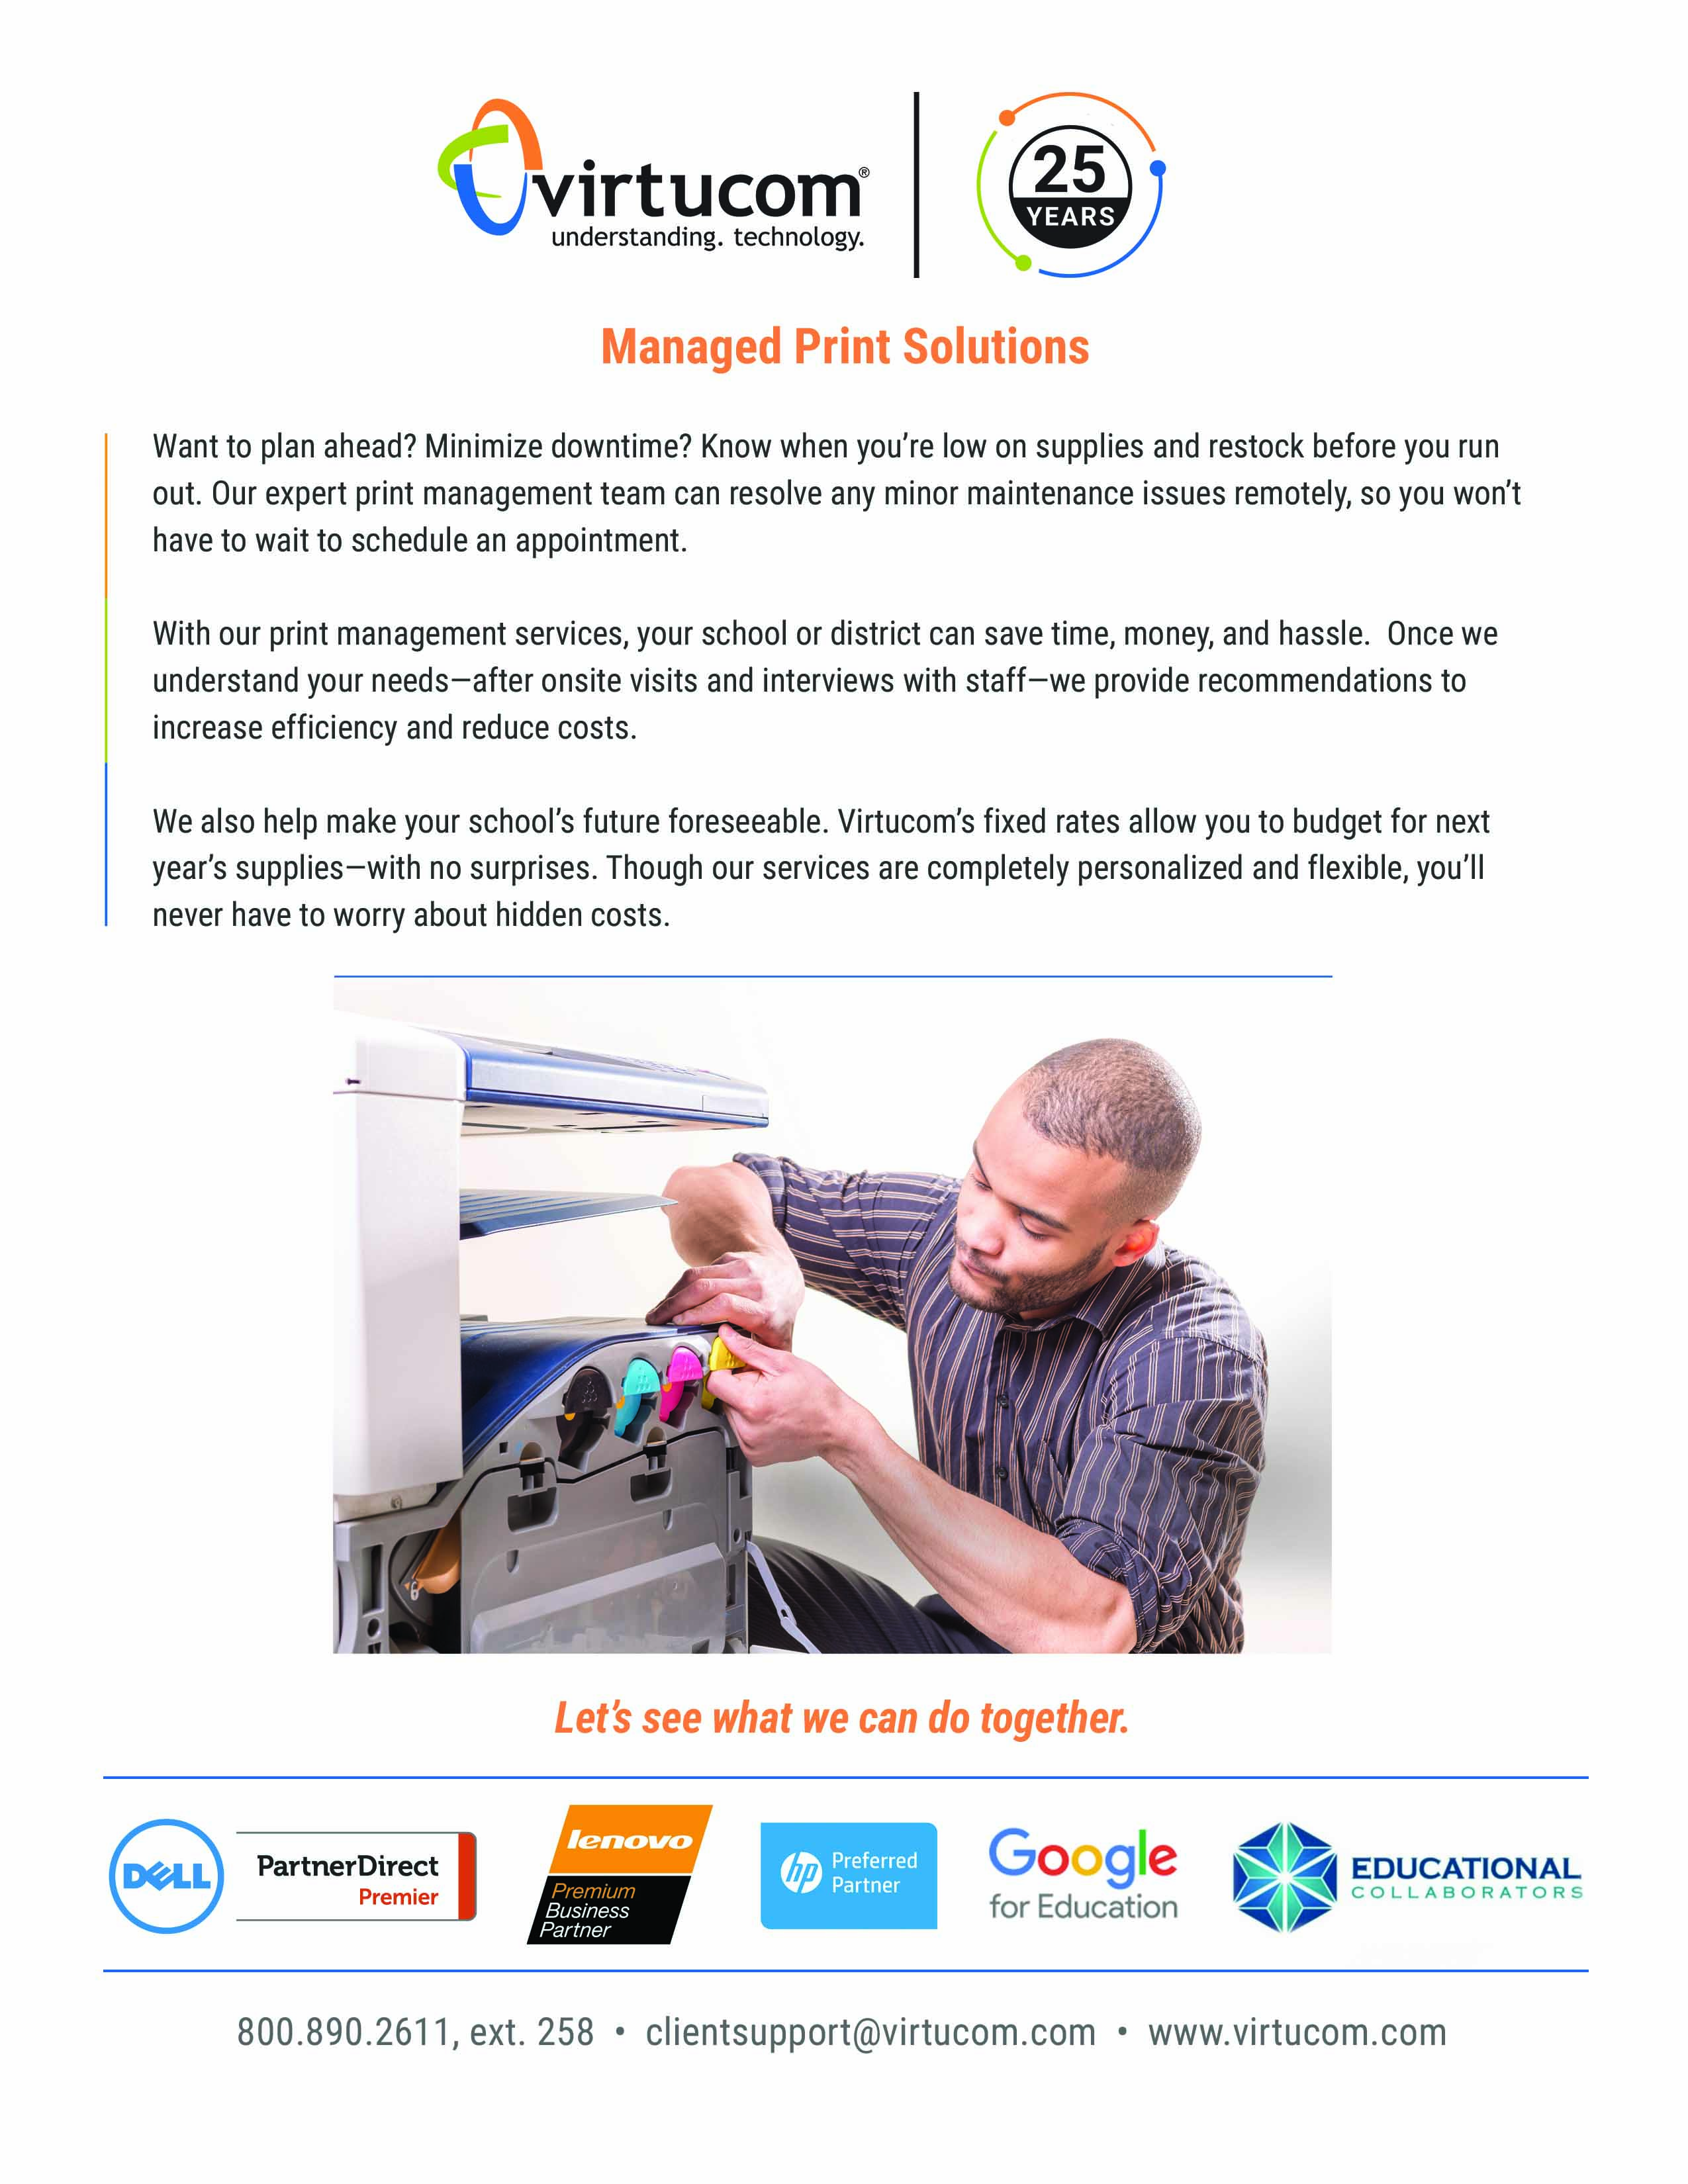 managed print solutions for k-12 schools